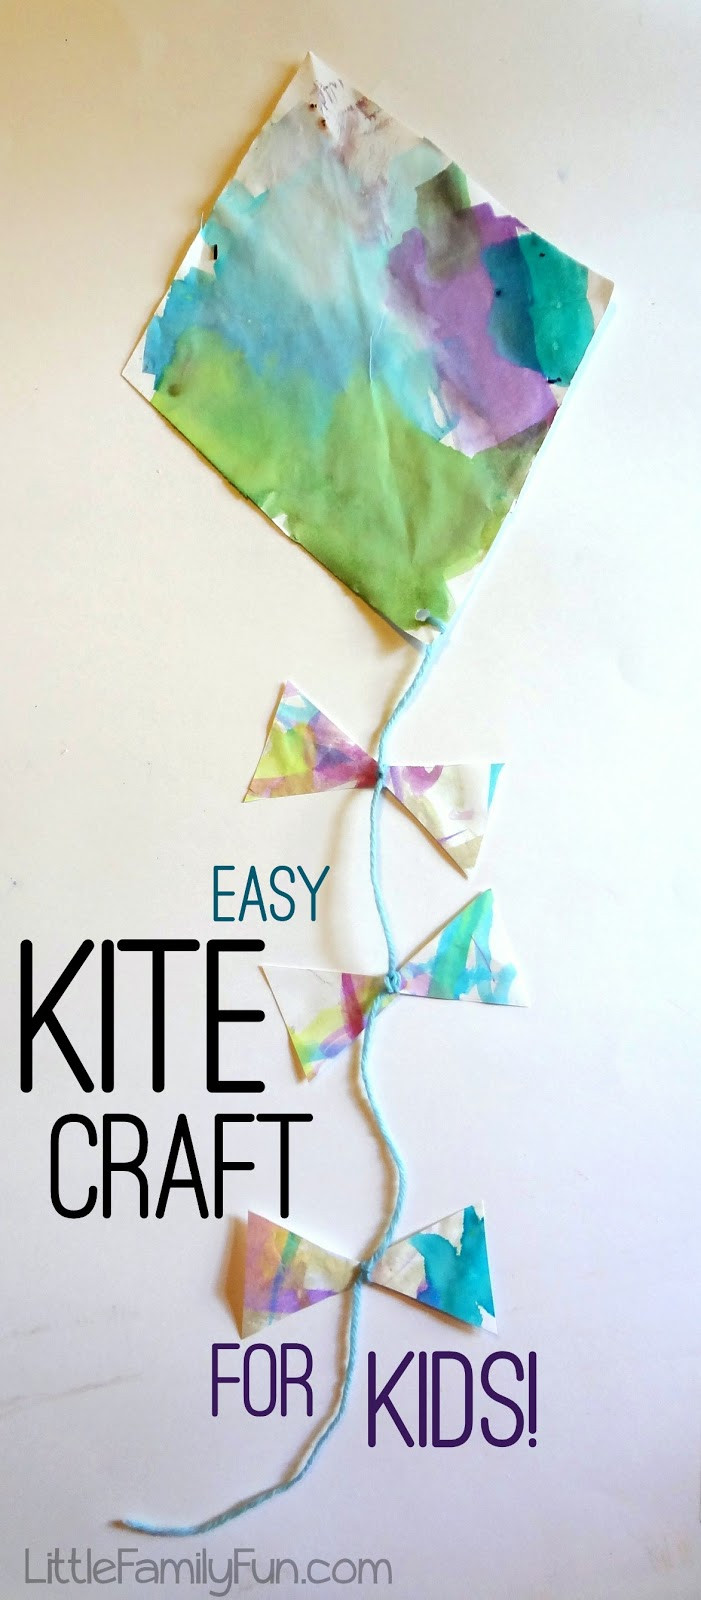 Easy Fun Crafts For Toddlers
 Easy Kite Craft for Kids